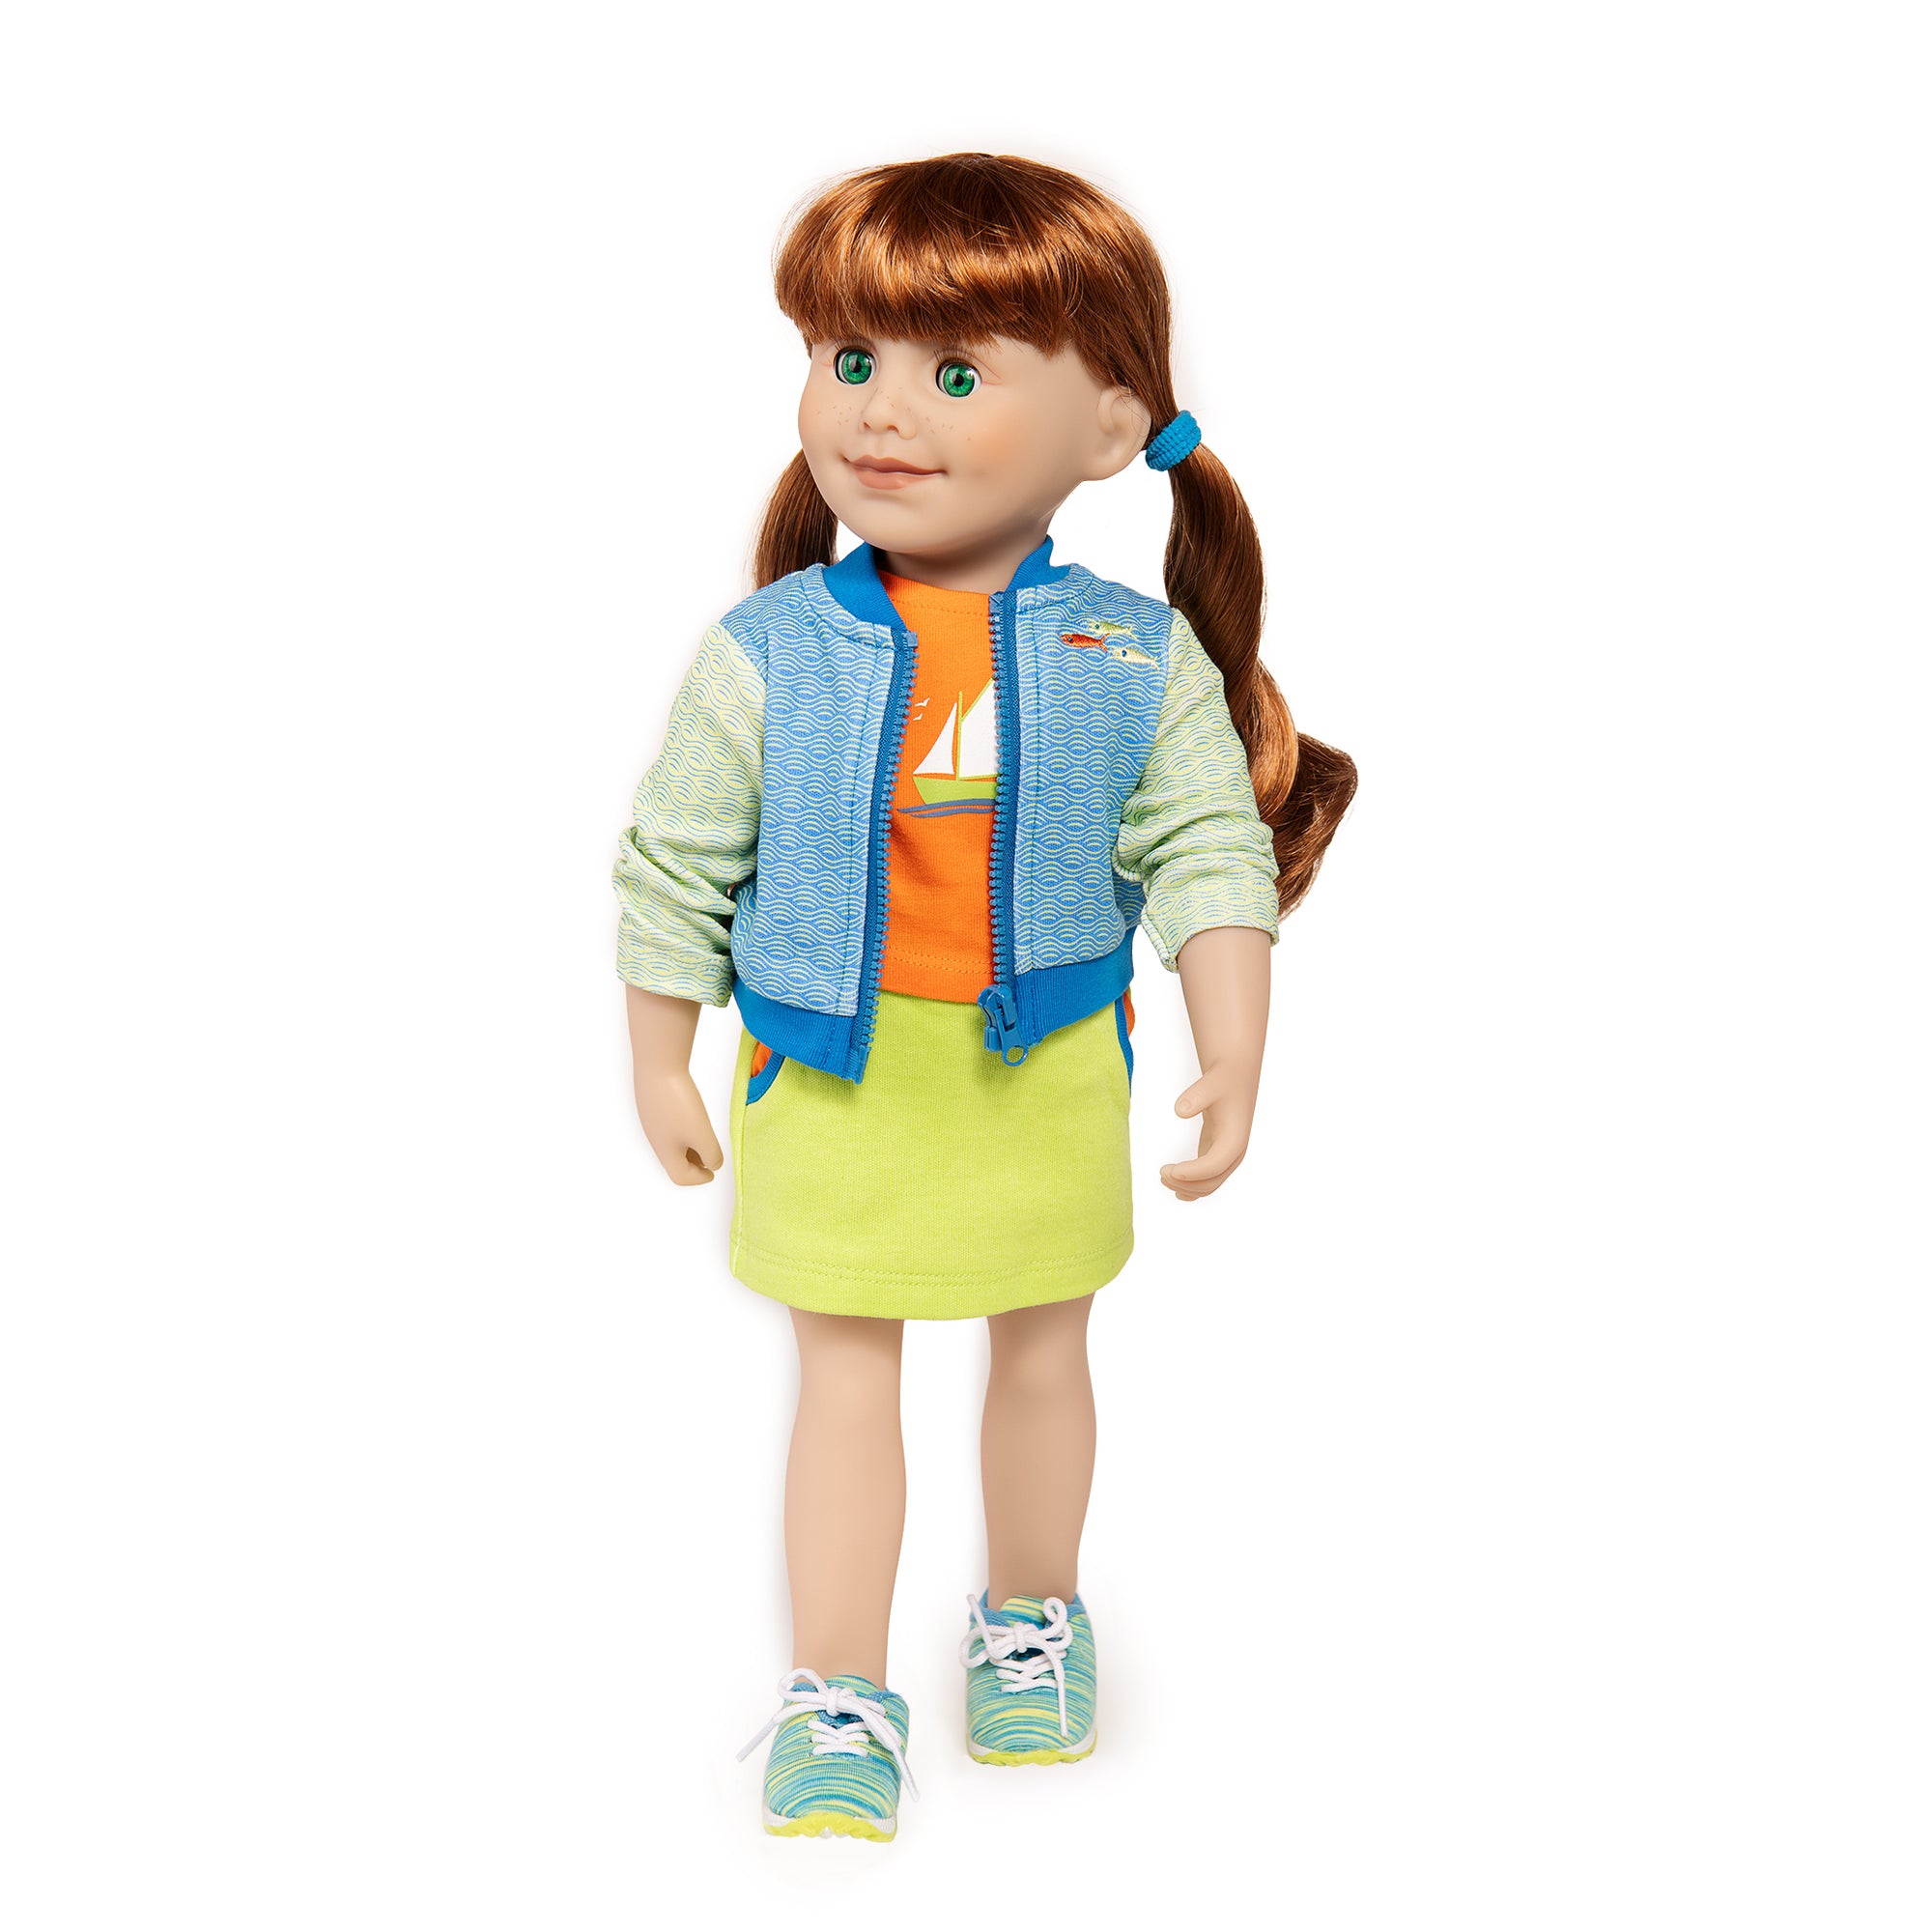 Canadian girl doll wearing a casual sporty outfit with maritime theme.